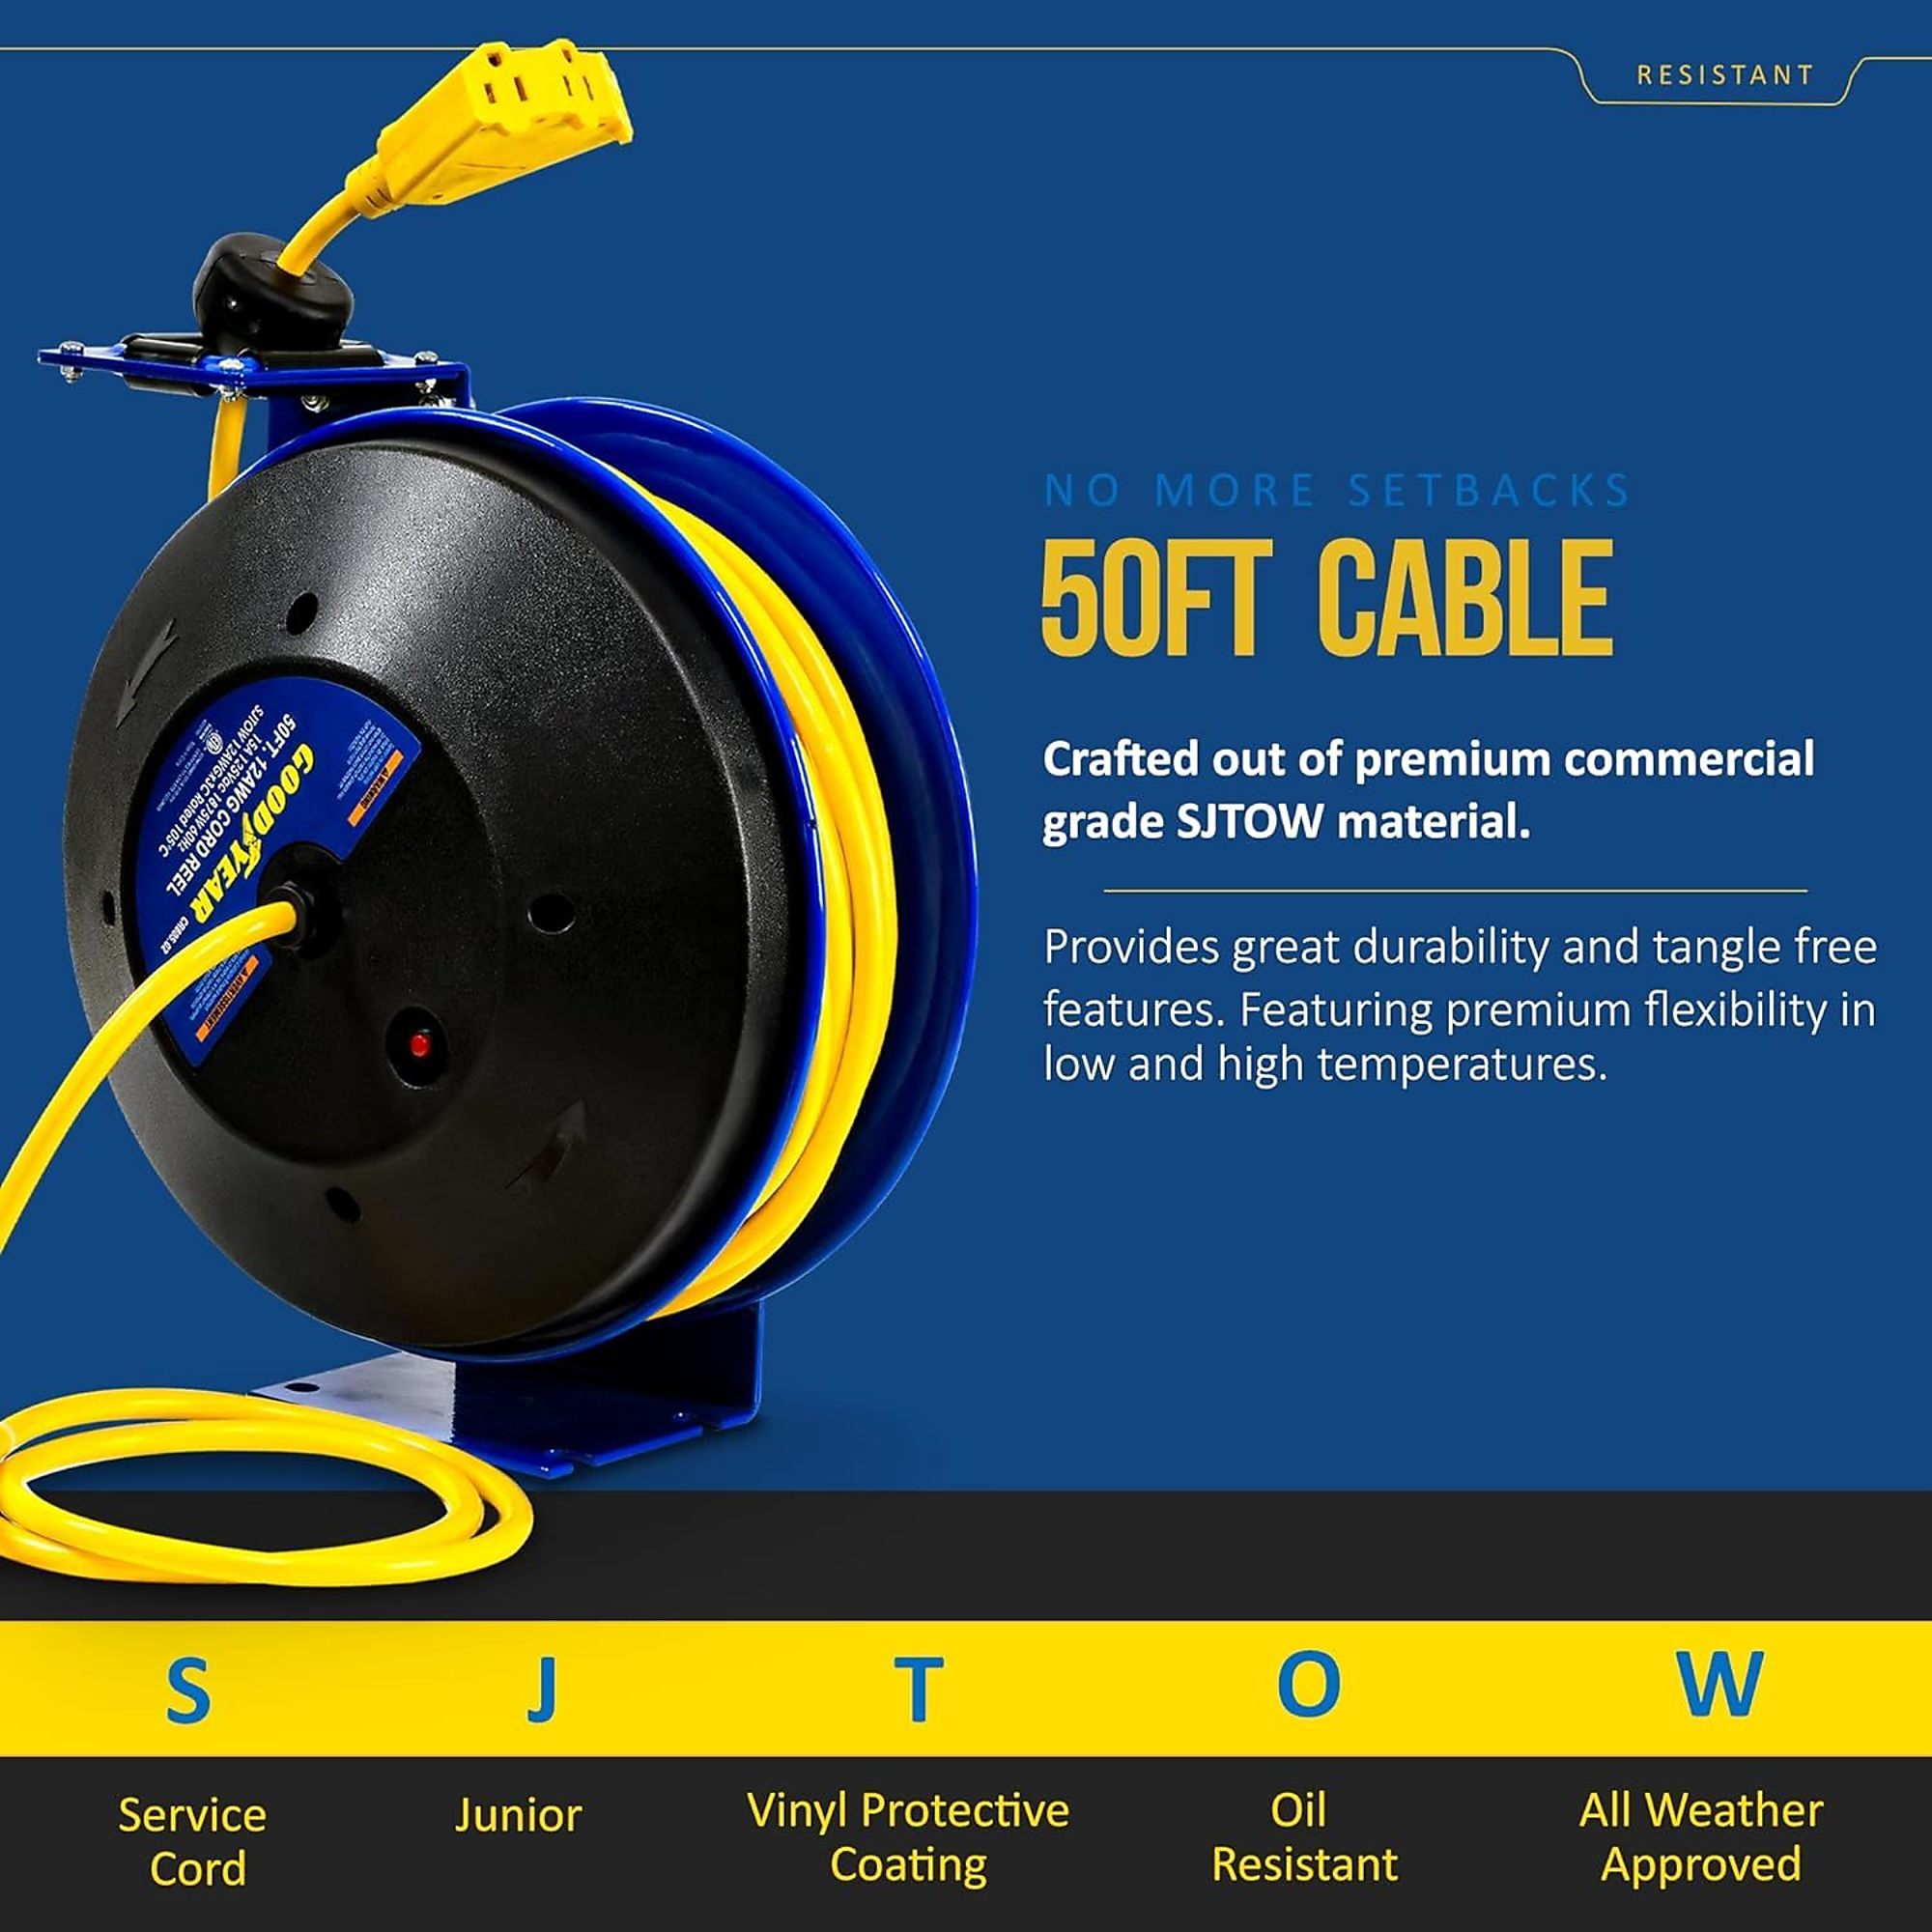 Goodyear Single Arm Construction Air Hose Reel Retractable(UK ONLY)